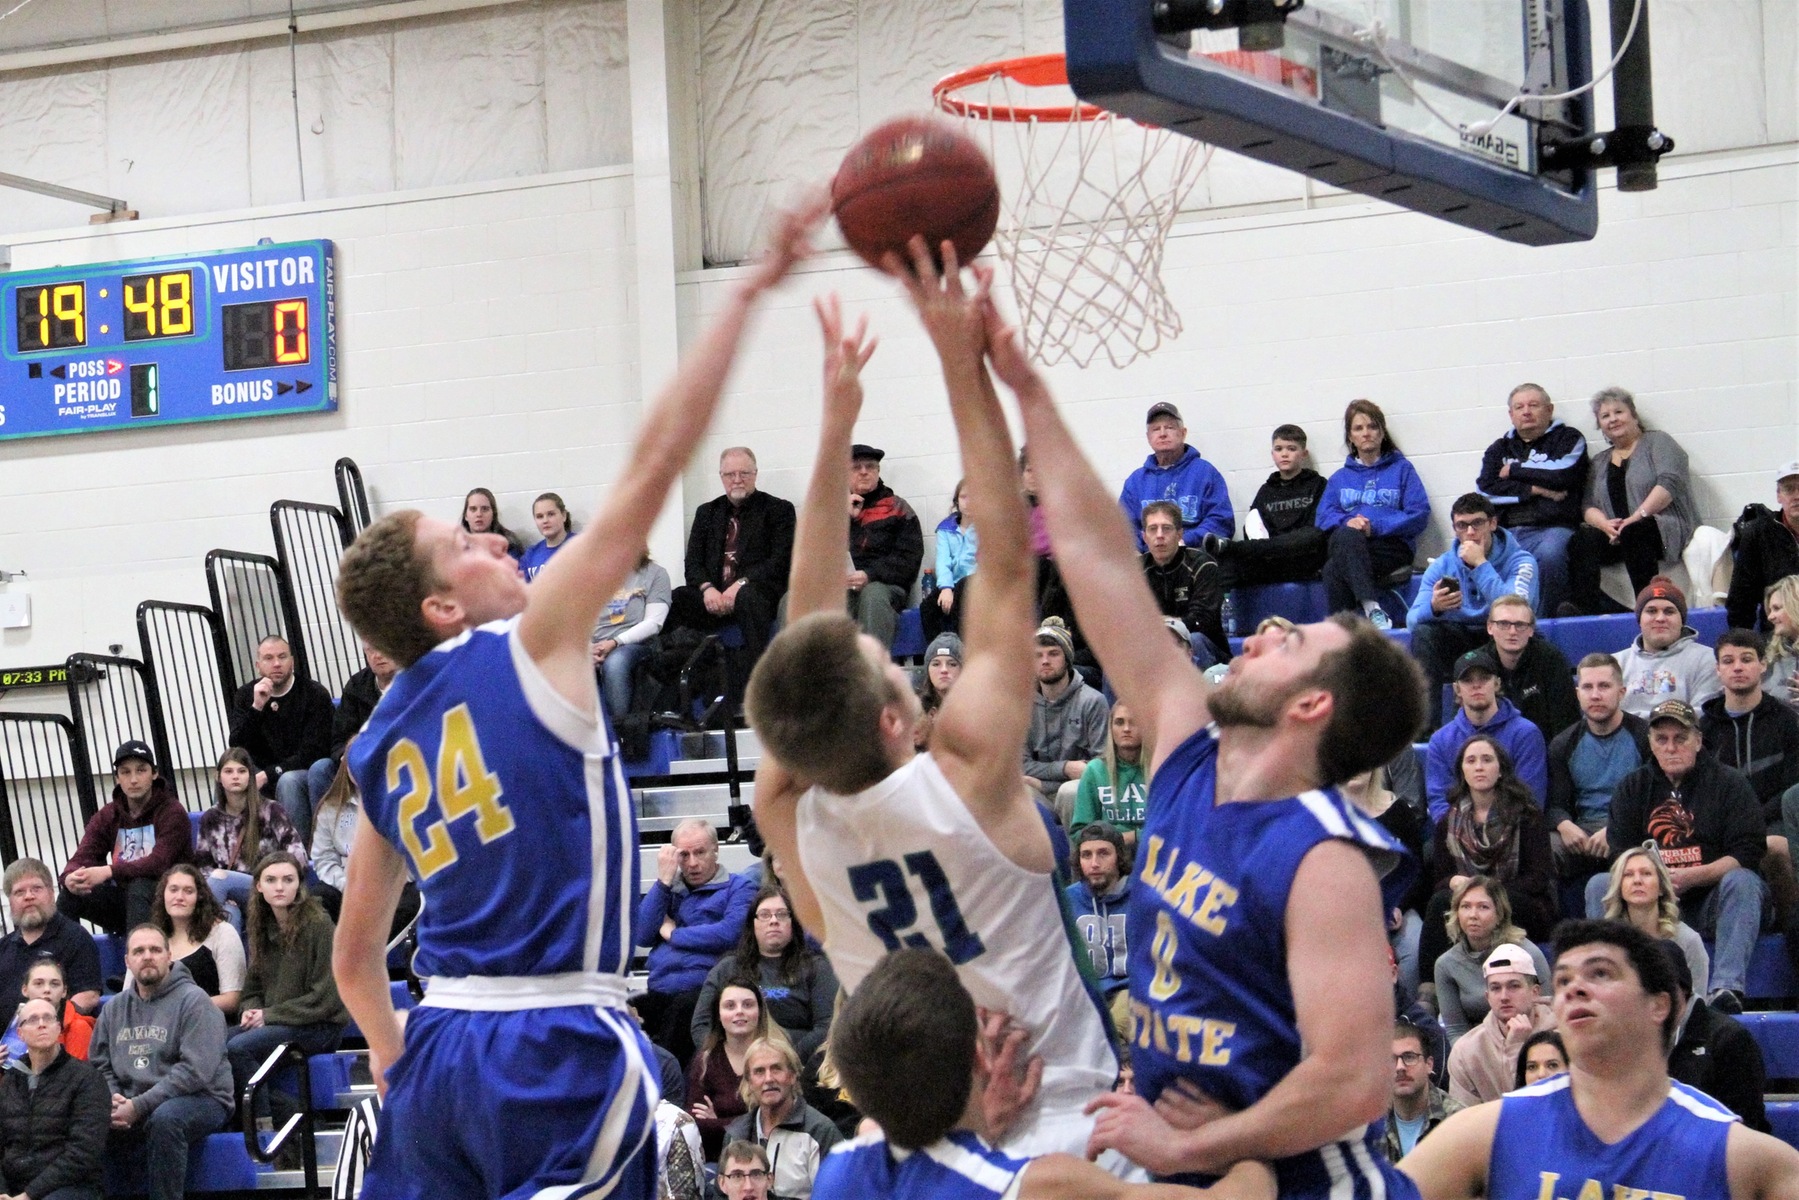 Tyler Willette releases a shot near the rim as two defenders reach trying to block his attempt